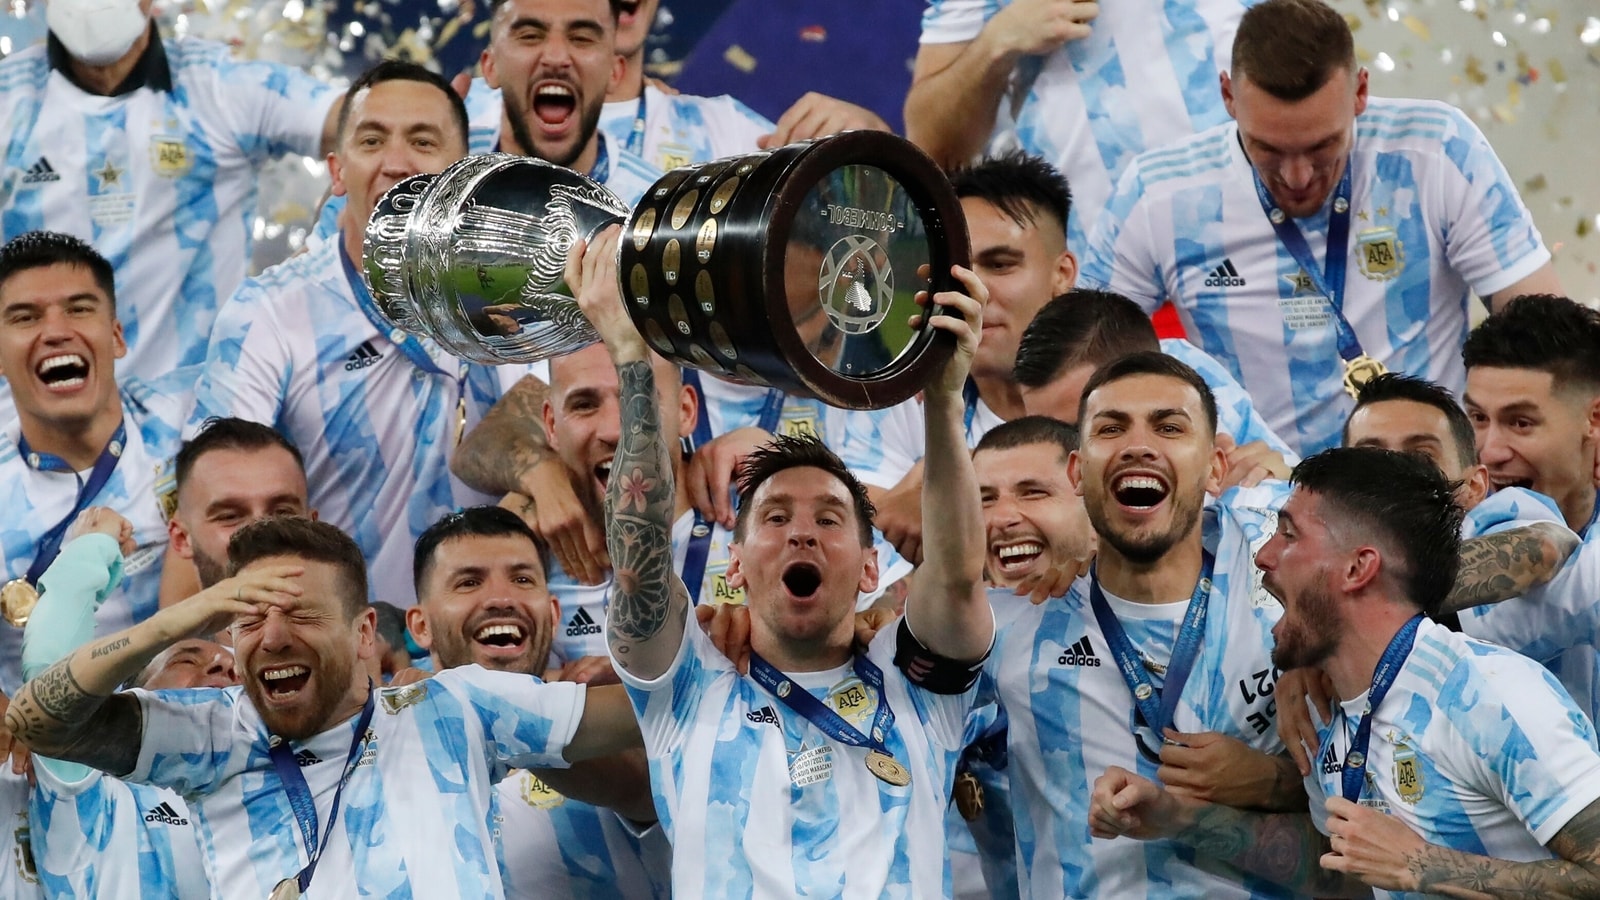 This is for all, and of course also for Diego': Messi dedicates Copa America triumph to the Argentines and Maradona